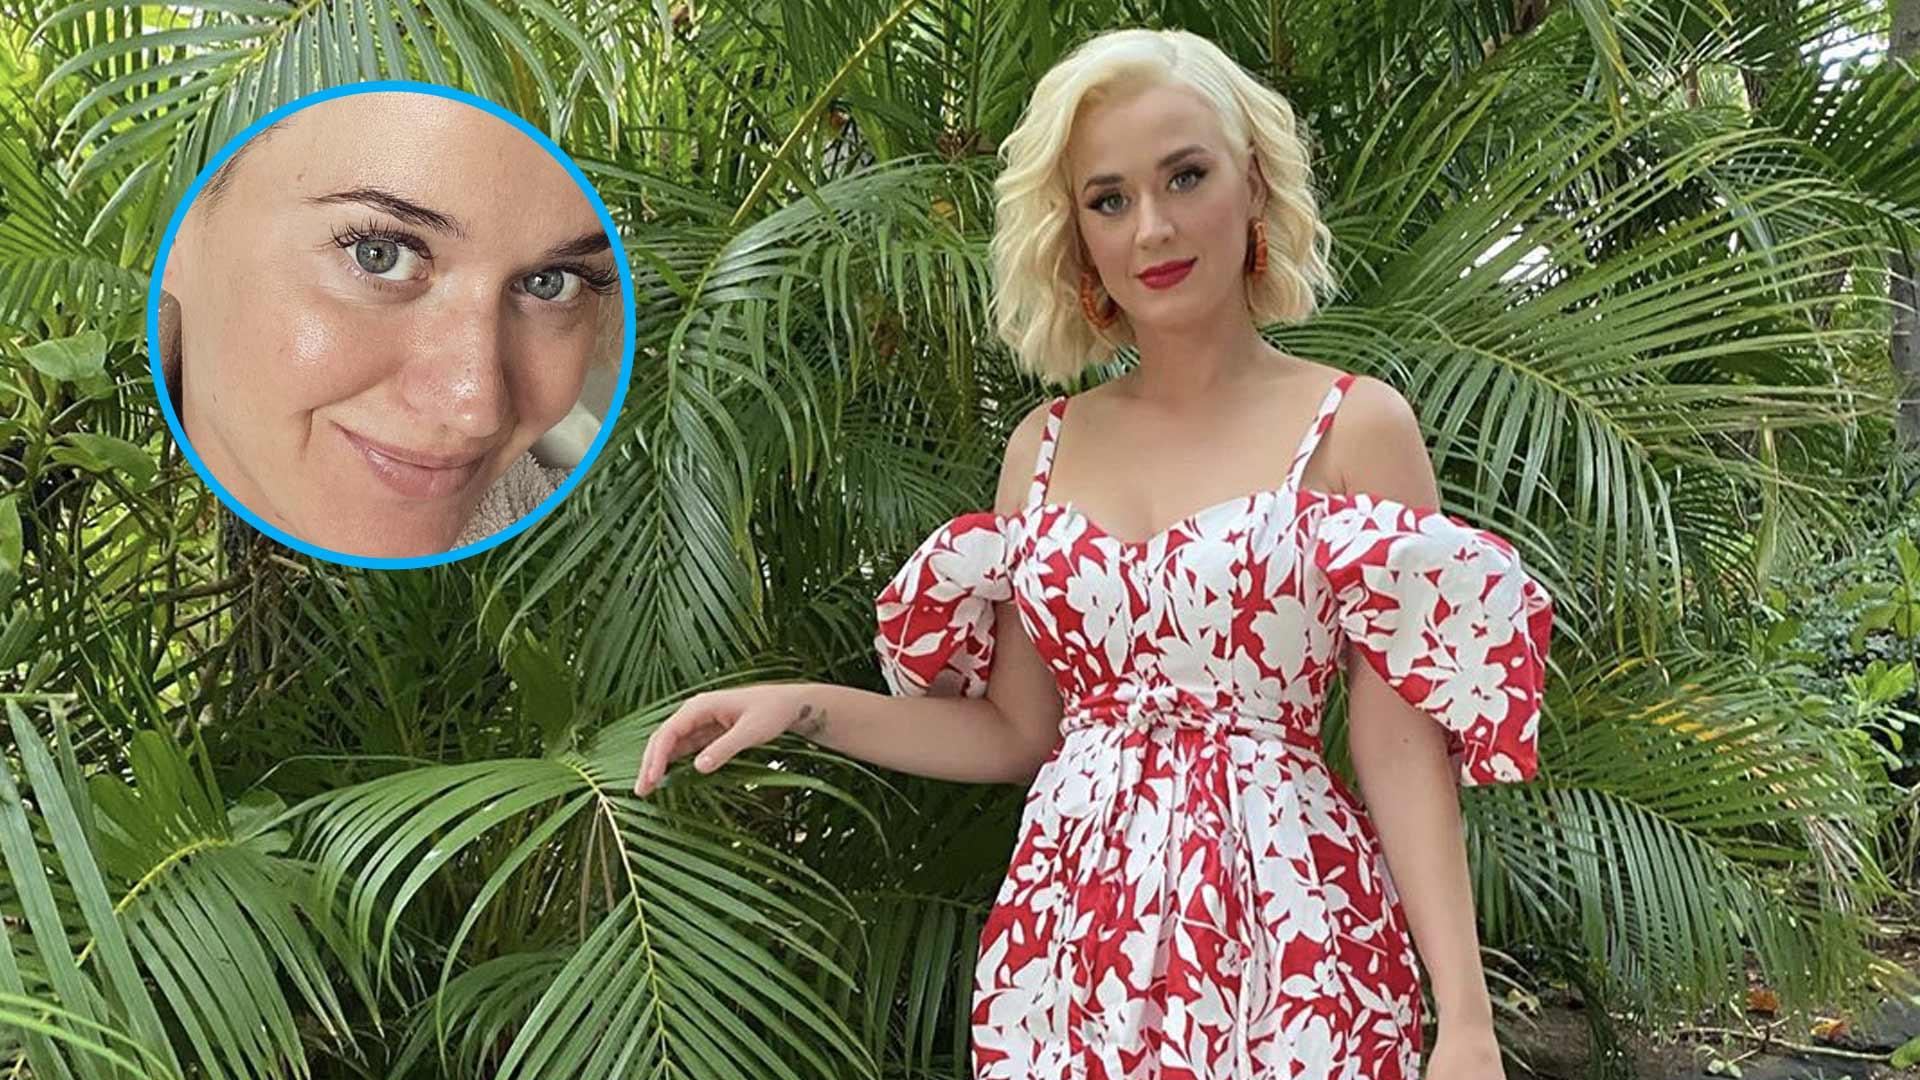 Katy Perry Shares Makeup Free Selfie ‘Blackheads and All Baby’